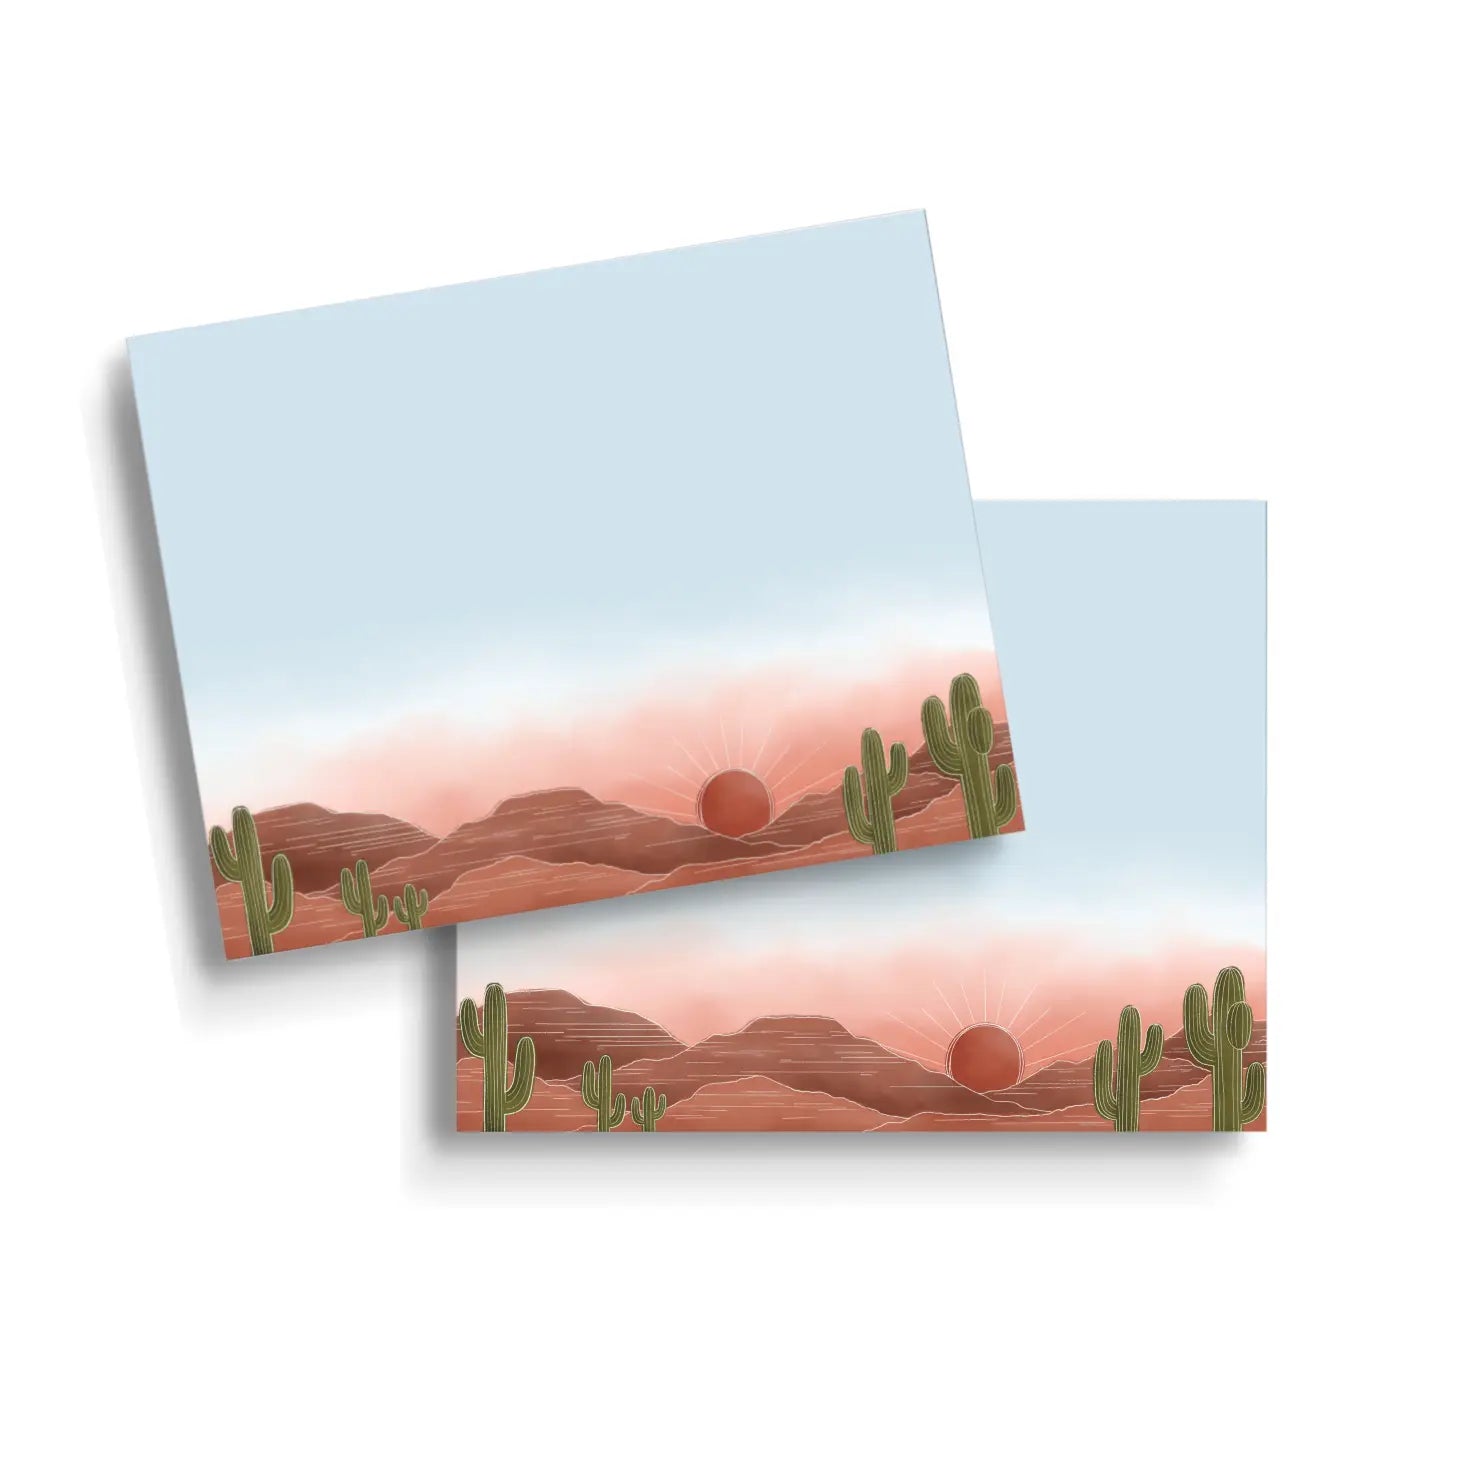 Pads of sticky note paper featuring a sunset over a desert landscape